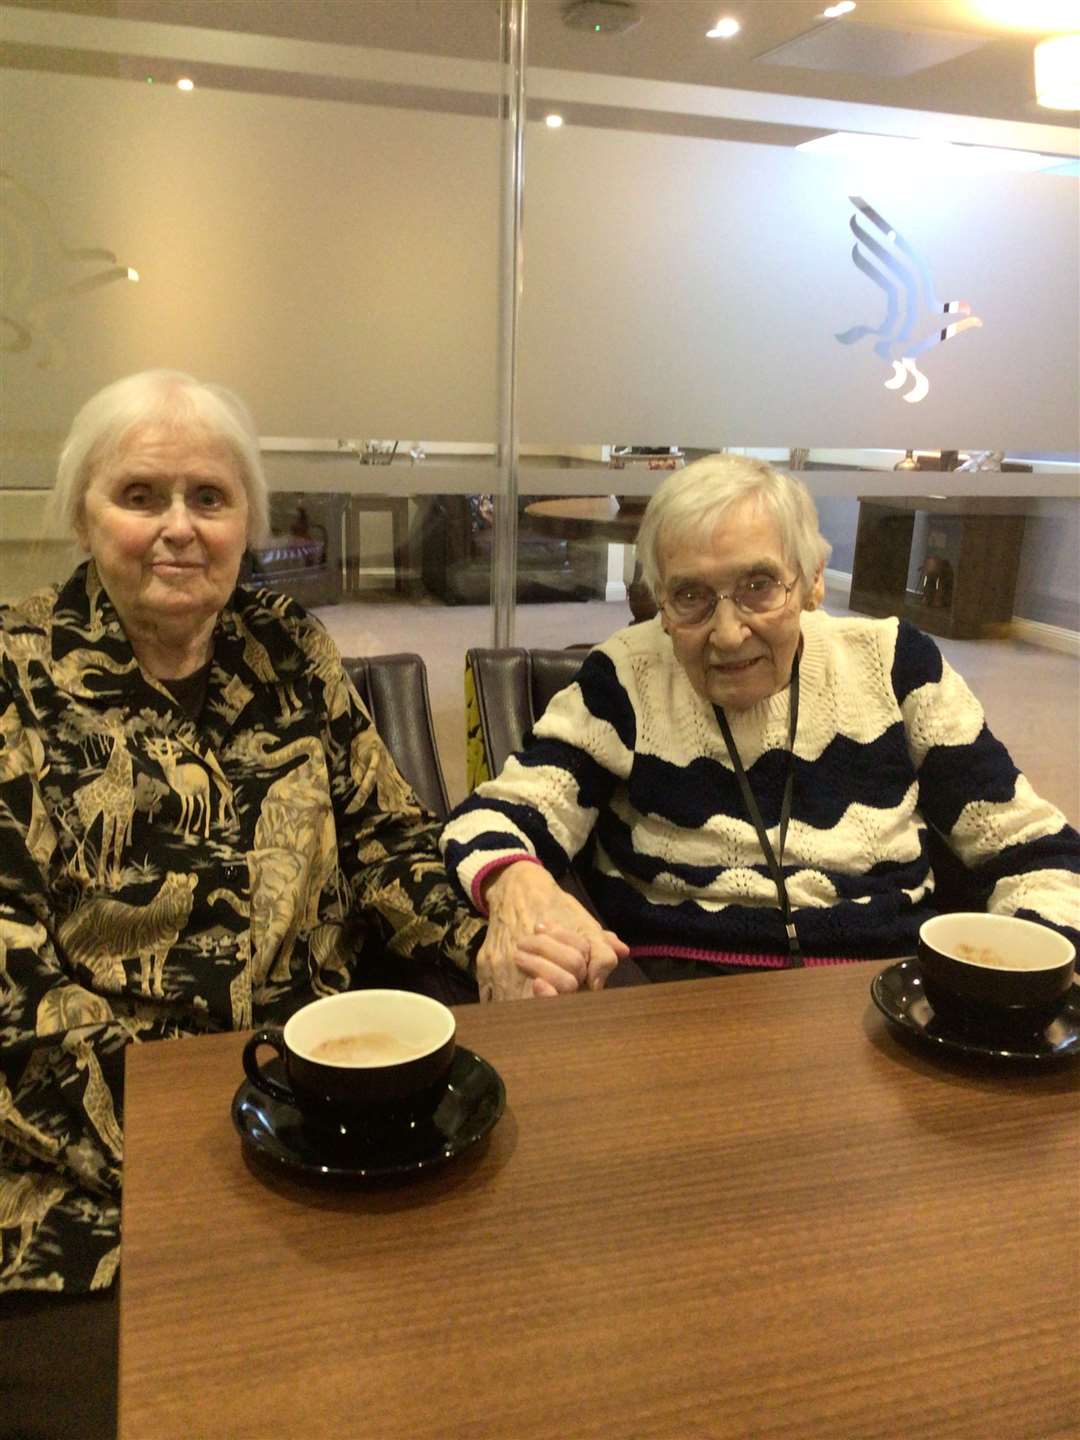 Phyllis Pieraccini (81) and Helen Malcom (91) were reunited at Meallmore Culduthel care home.